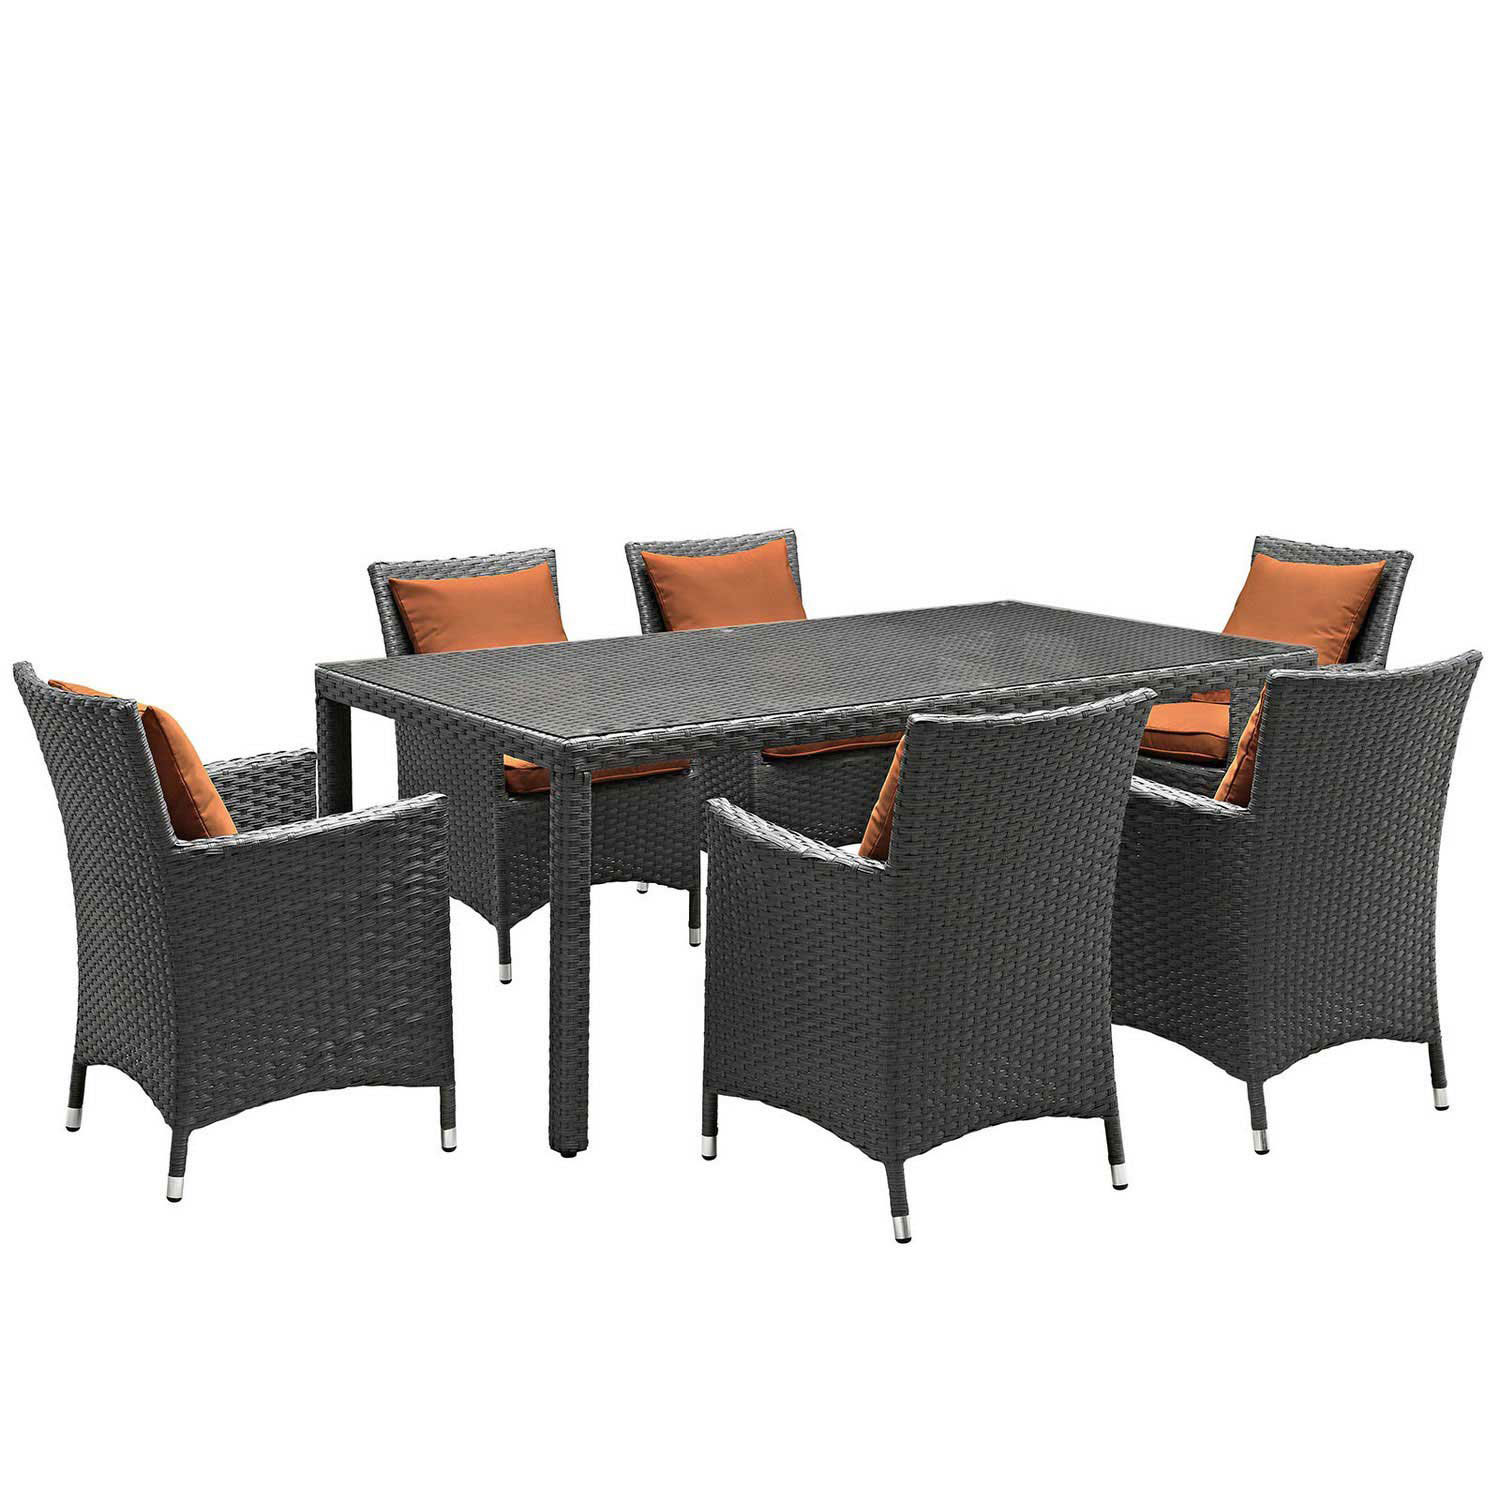 Modway Sojourn 7 Piece Outdoor Patio Sunbrella Dining Set - Canvas Tuscan